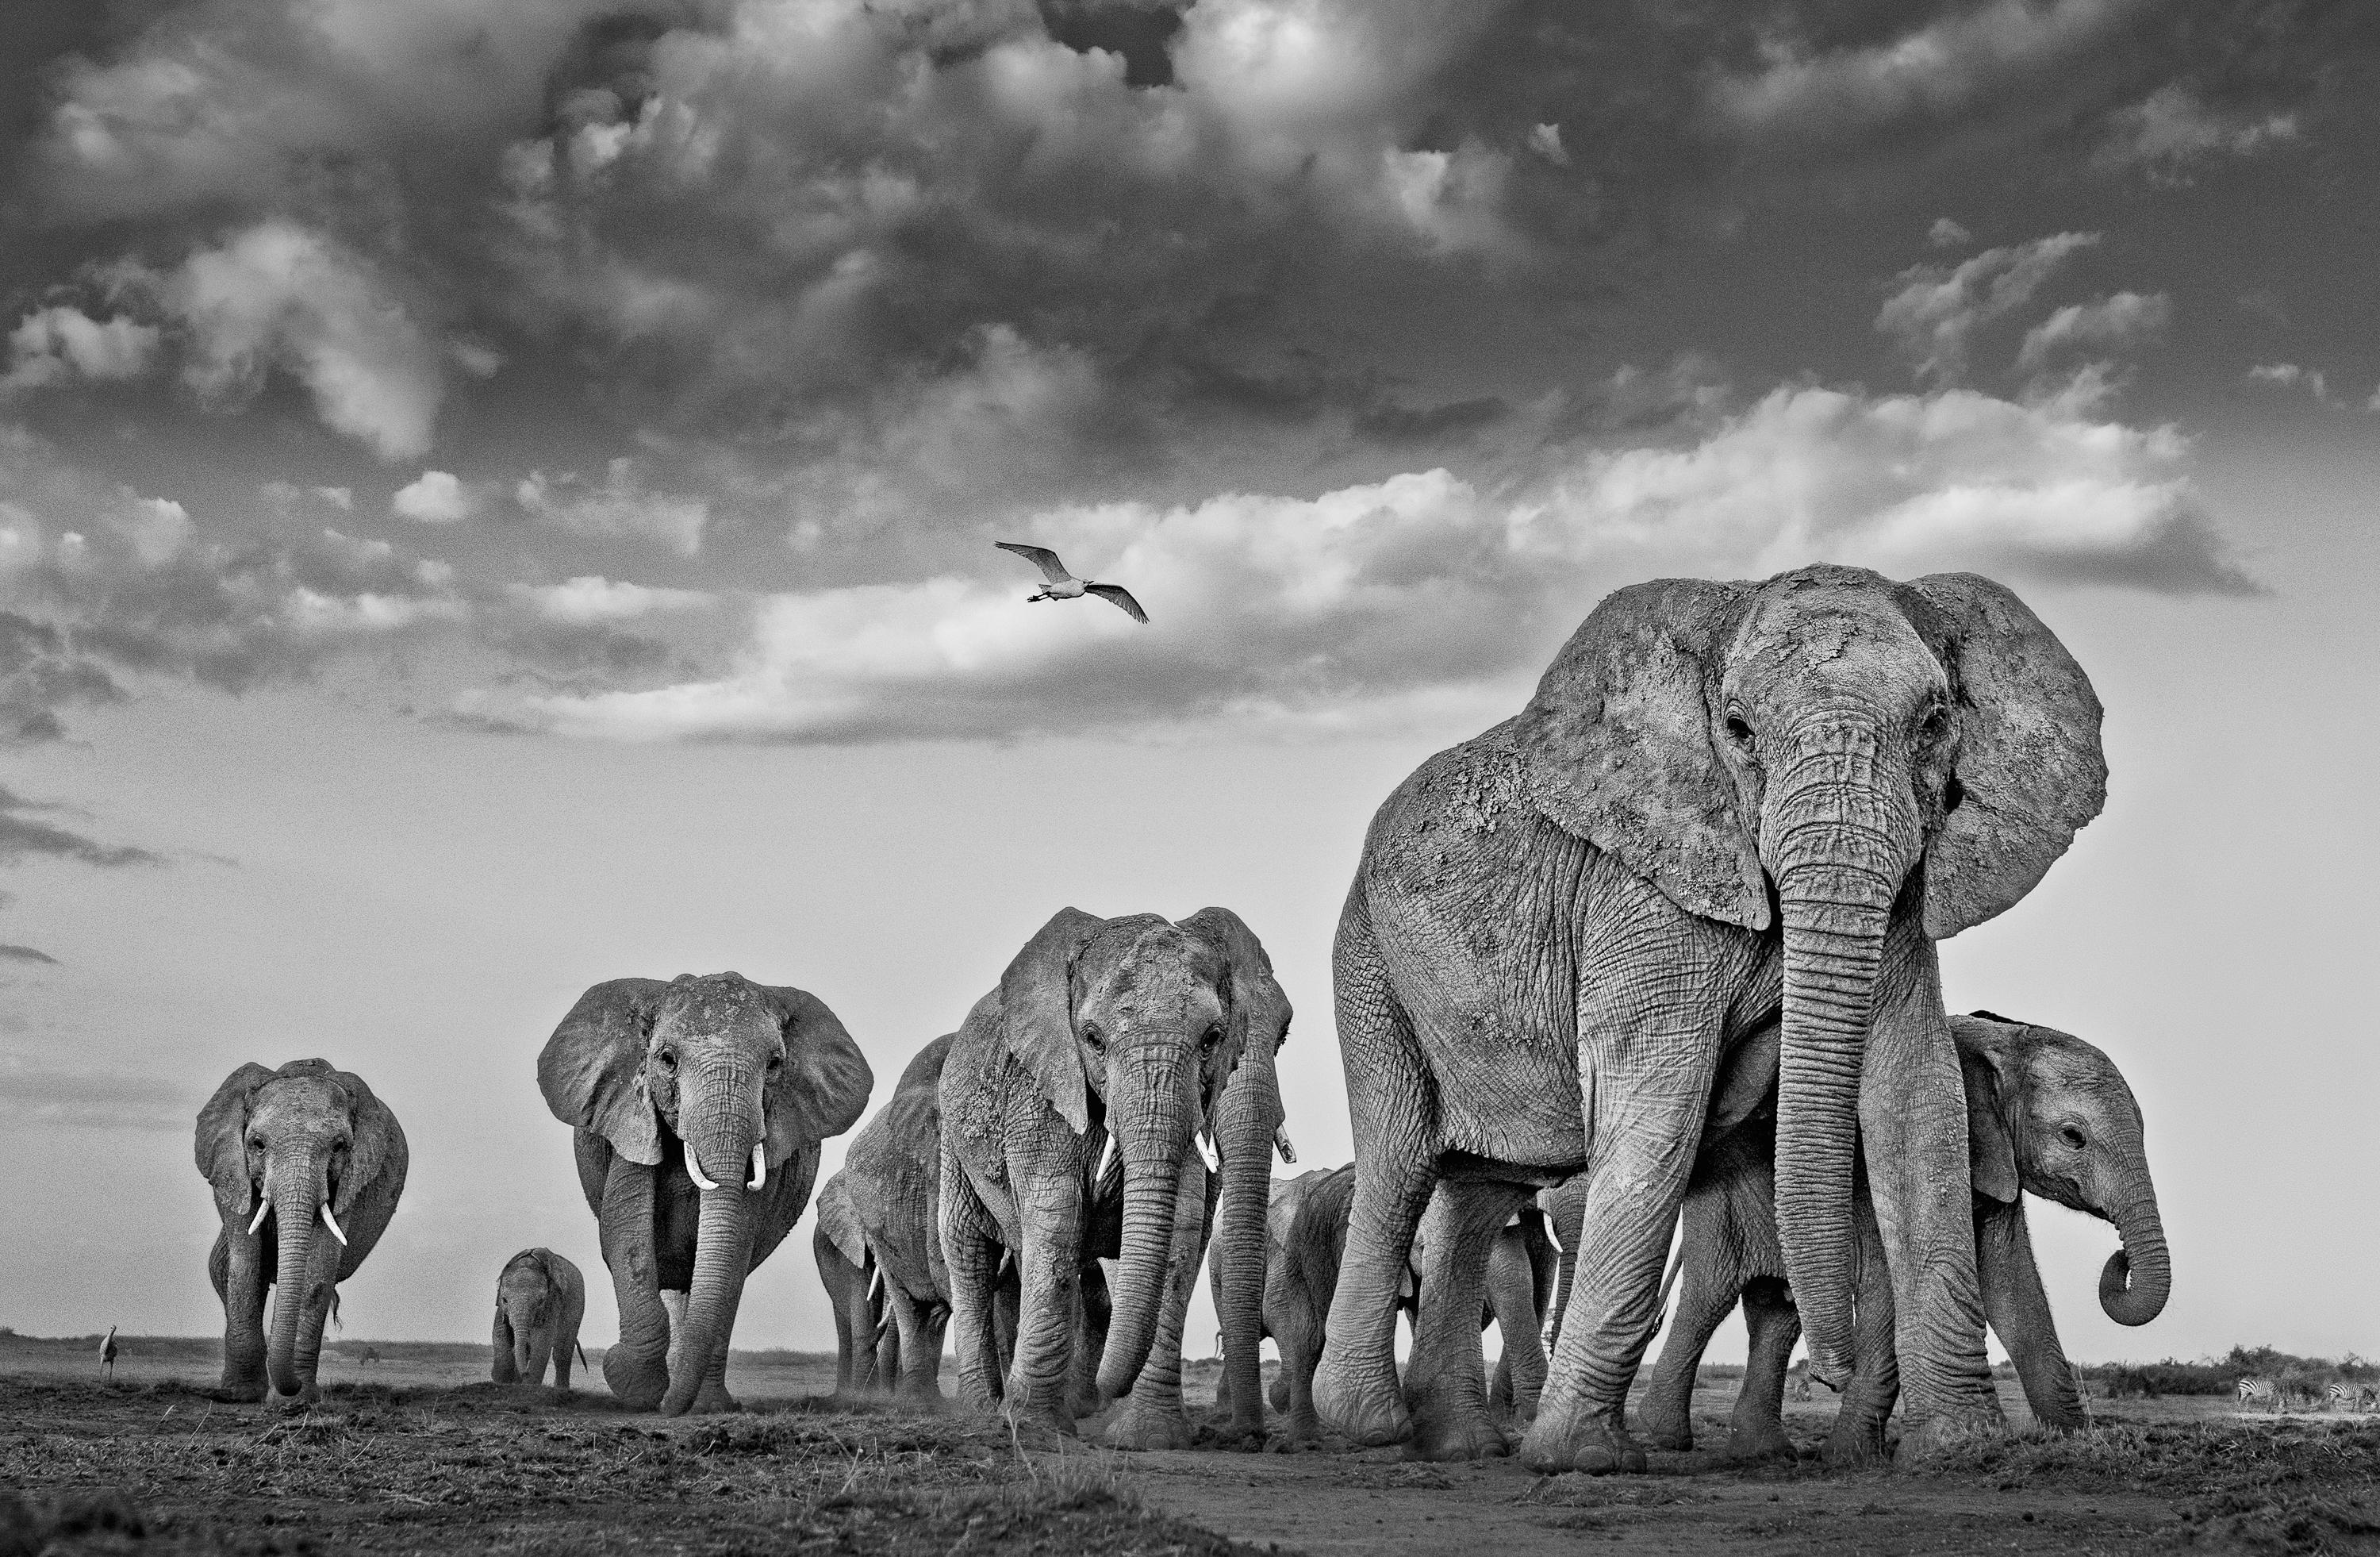 James Lewin Black and White Photograph - The Elephants and the Egret, 2021 (38" x 58.10")